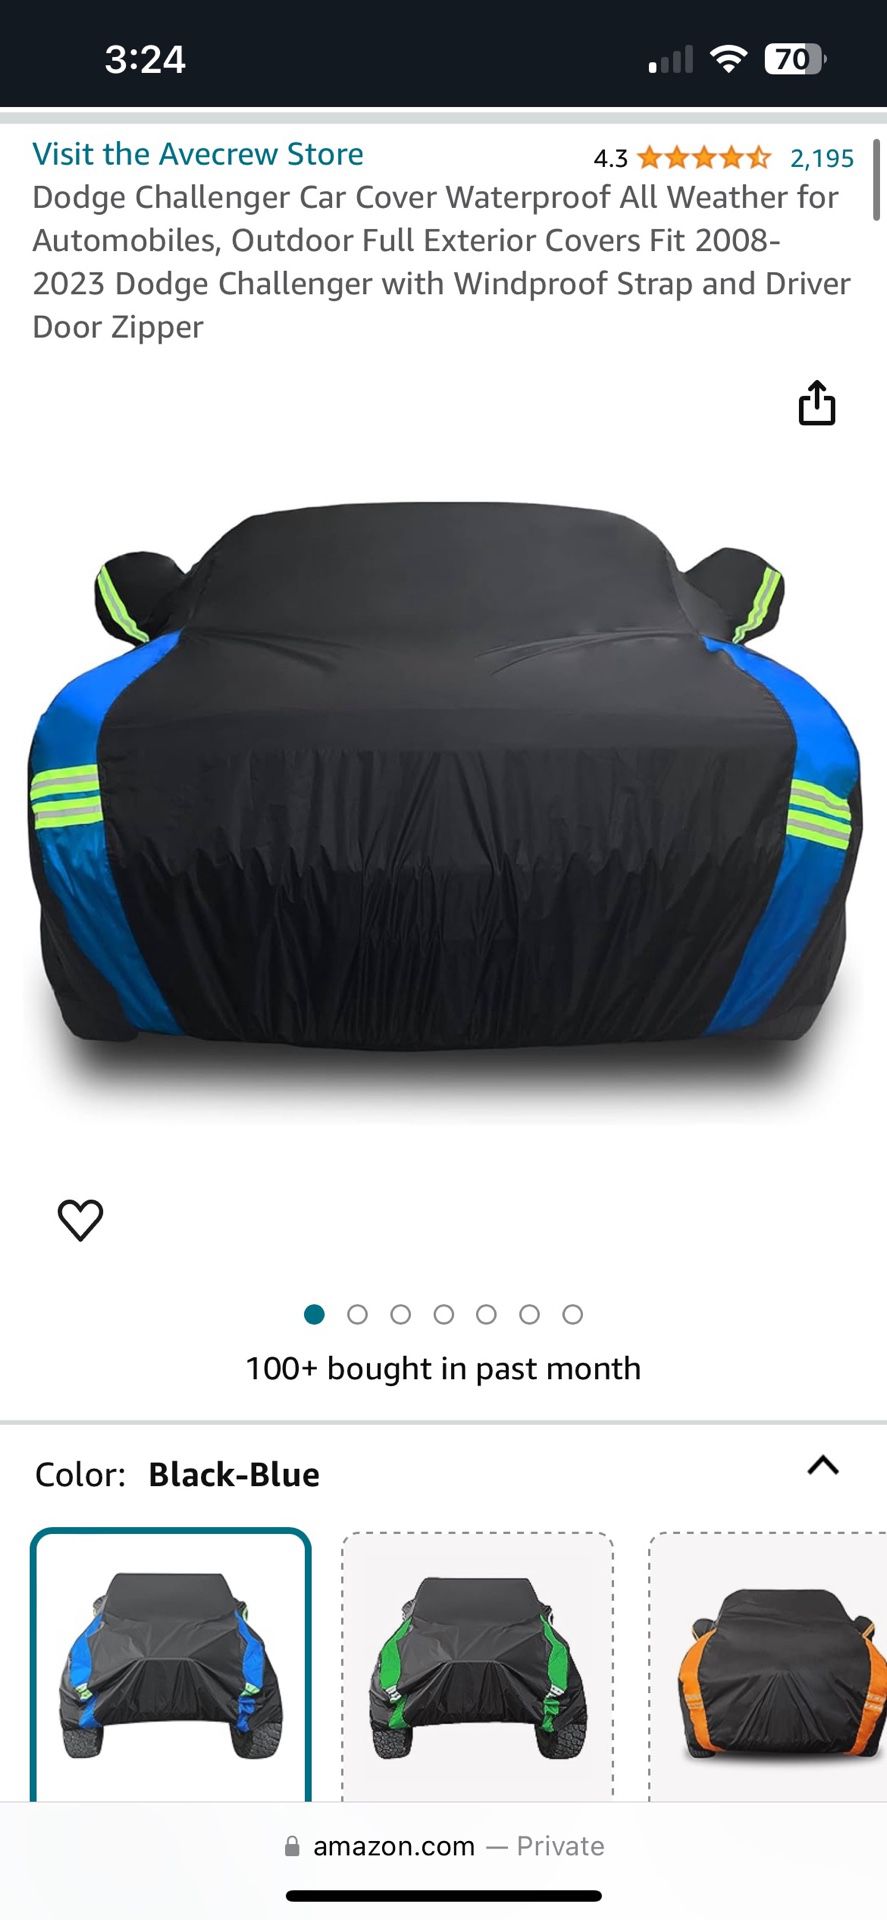 Dodge Challenger Brand New Car Cover.